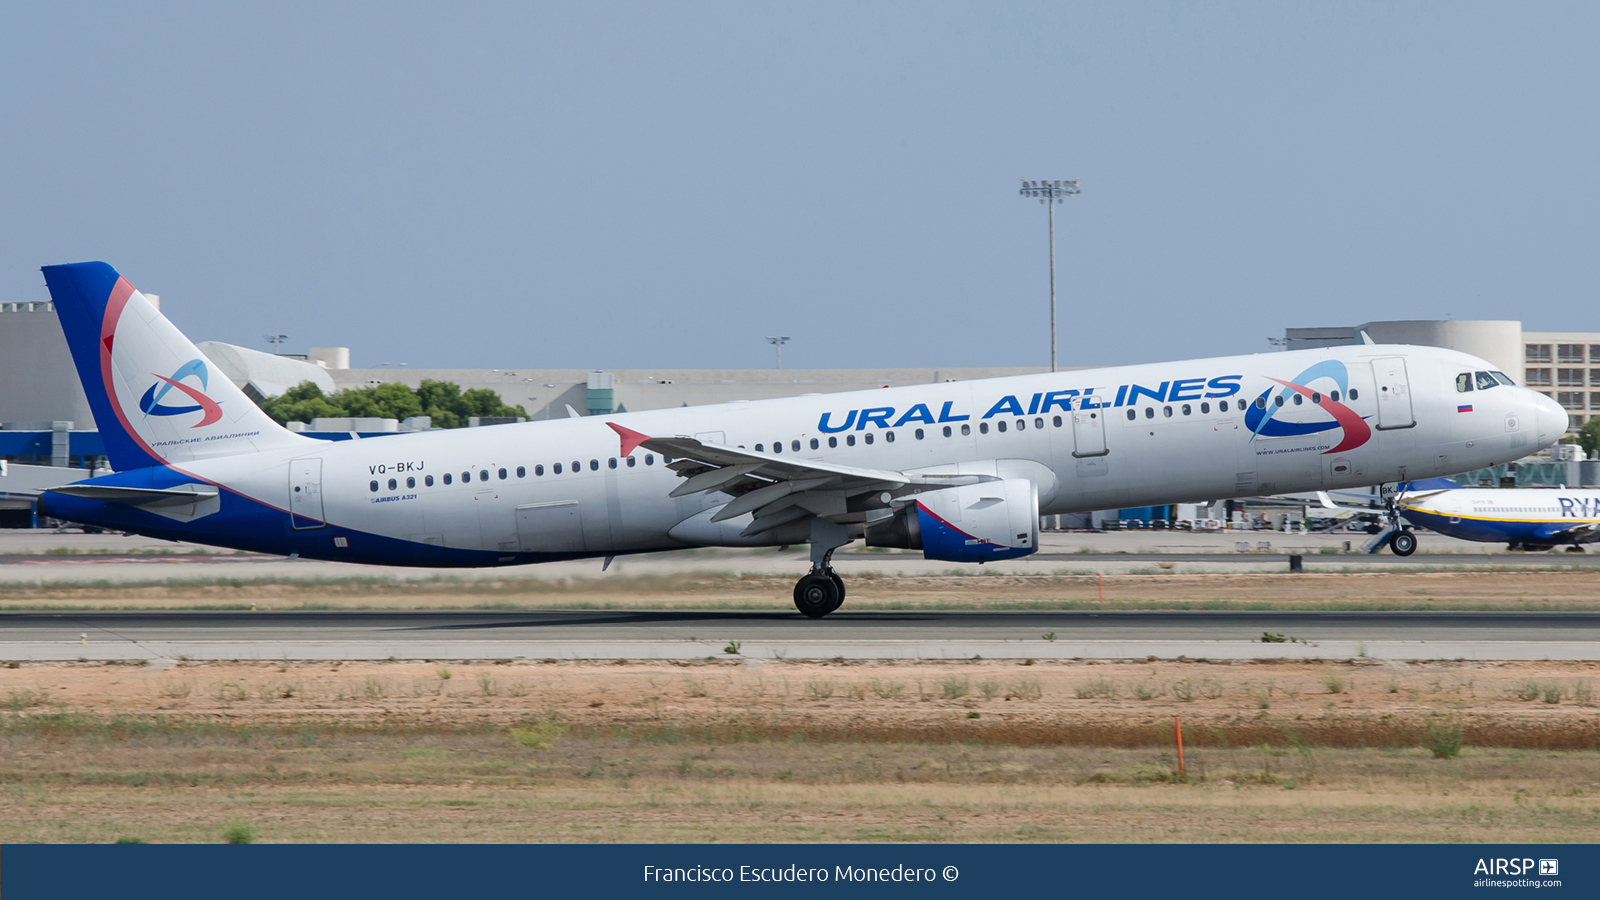 Ural Airlines  Airbus A321  VQ-BKJ